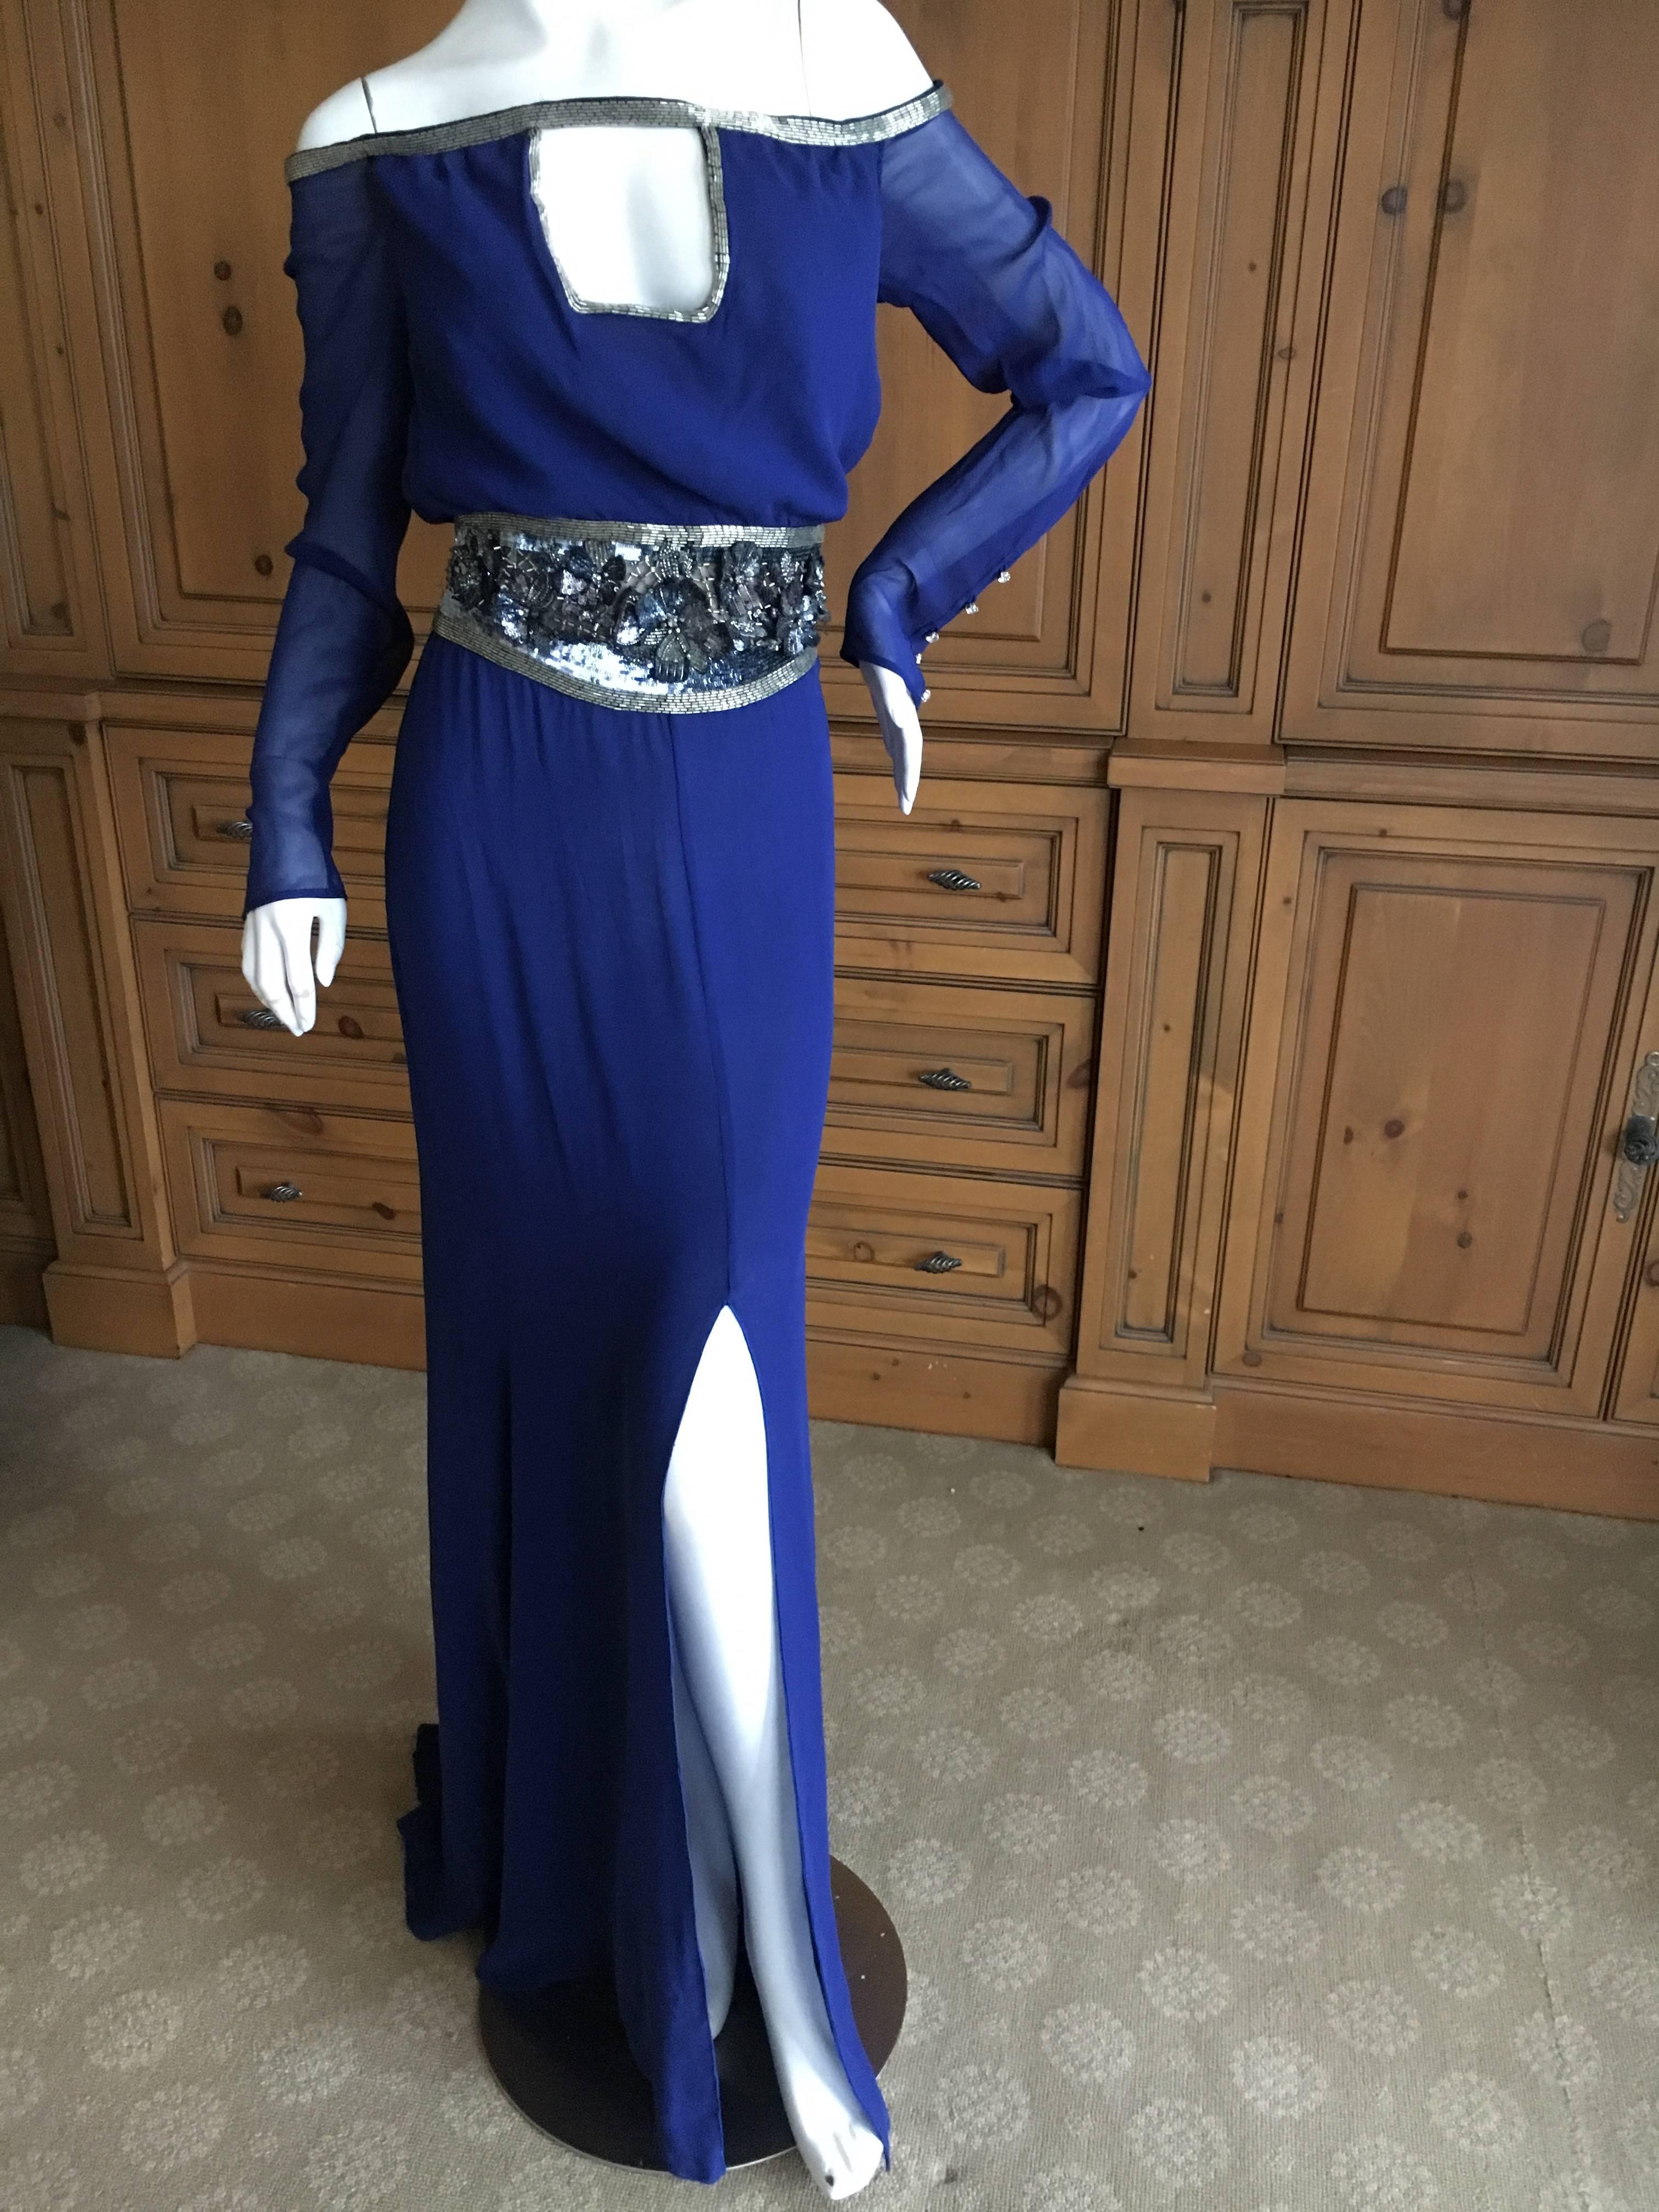 Valentino Silk Chiffon Off the Shoulder Beaded Evening Dress with Keyhole Bust In Excellent Condition For Sale In Cloverdale, CA